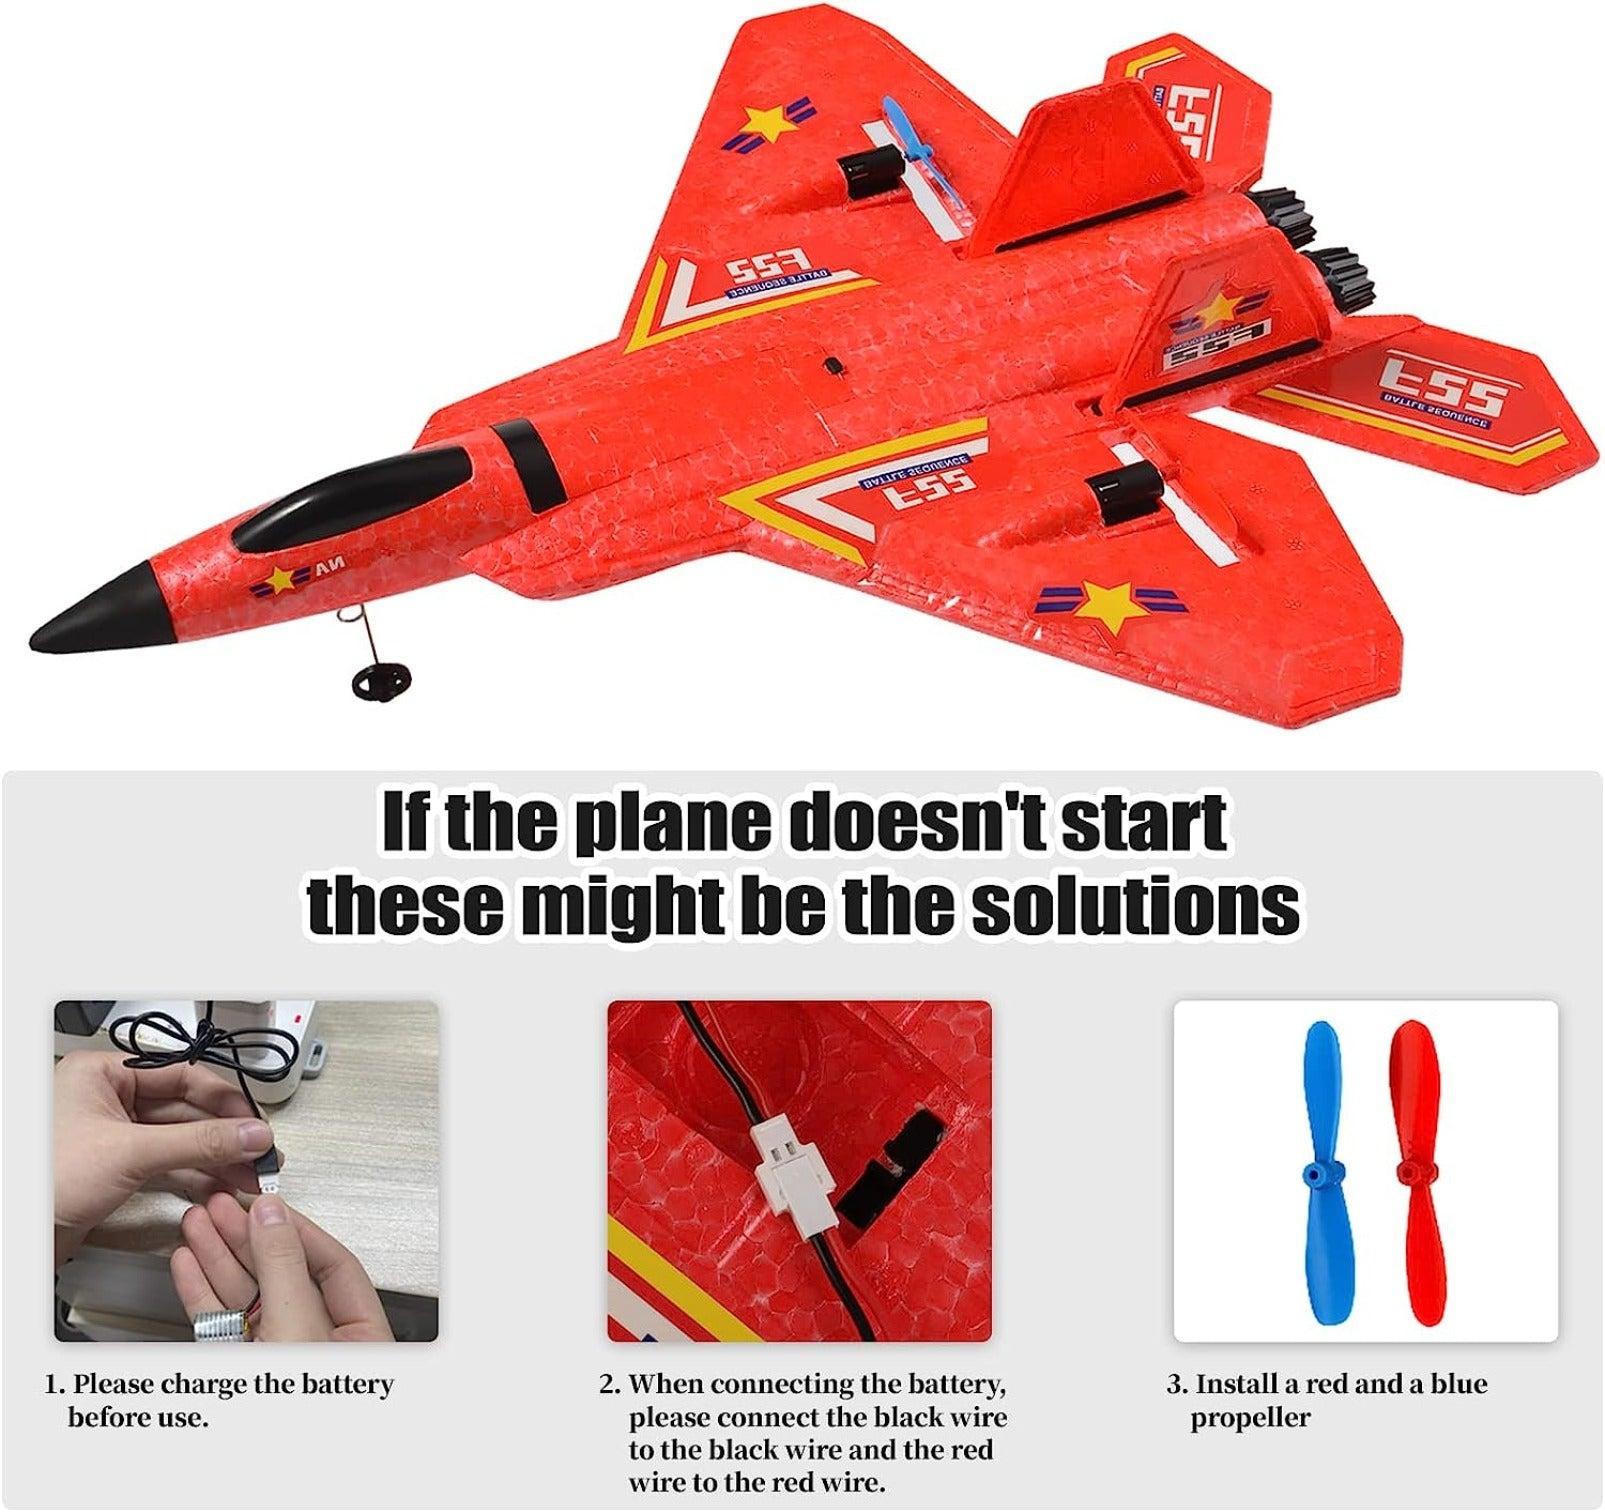 Rc Jet Plane Toy: Factors to Consider When Choosing an RC Jet Plane Toy